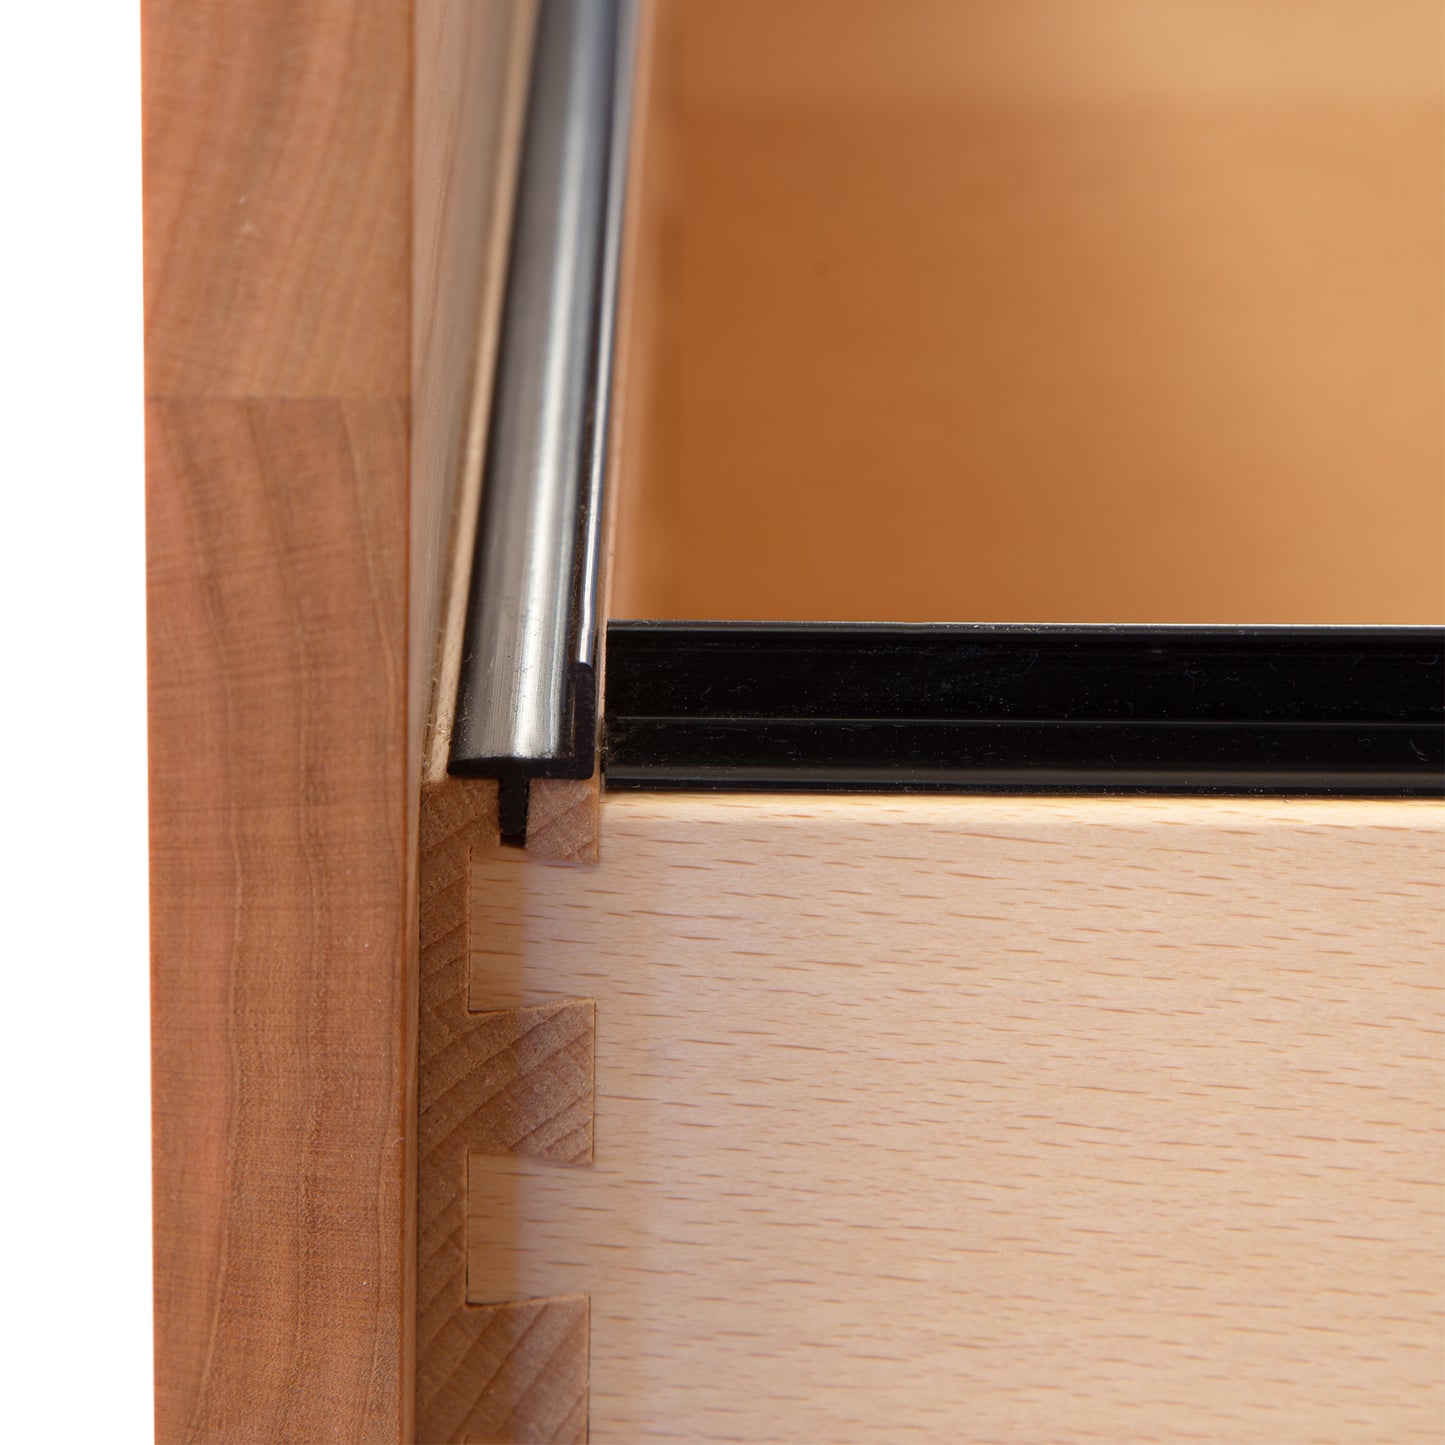 A close up view of the Heartwood Shaker Vertical File Cabinet by Vermont Furniture Designs.